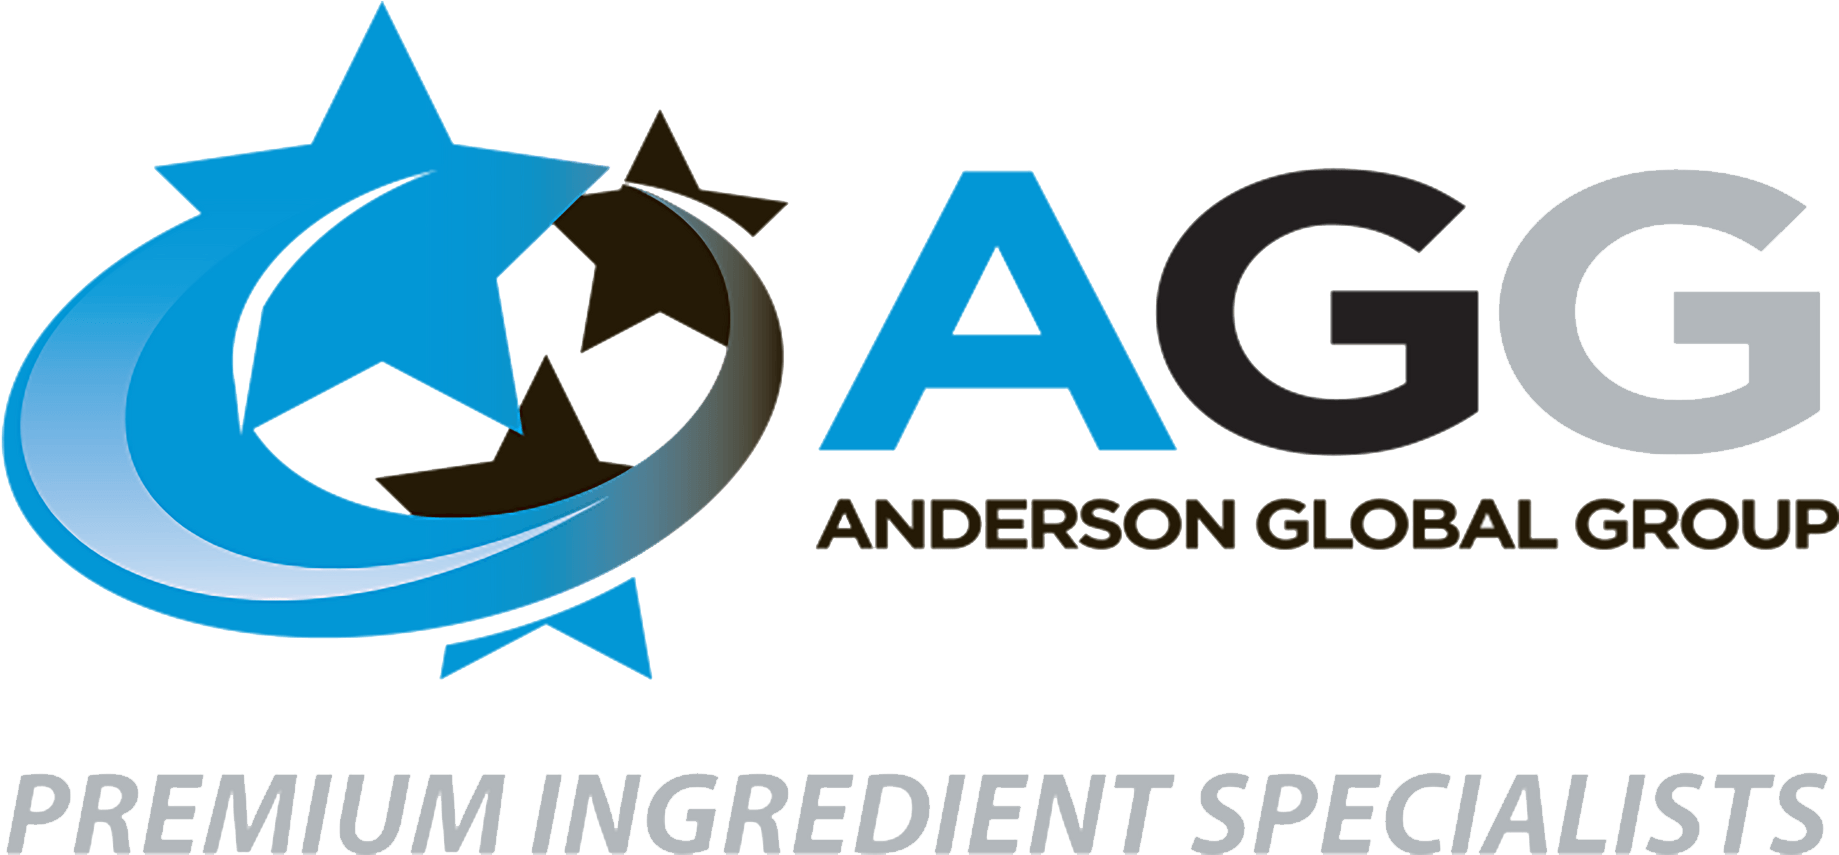 Ed308042 C0d8 4455 B00f 83eecaf49010 - Anderson Global Group Logo (2048x854), Png Download